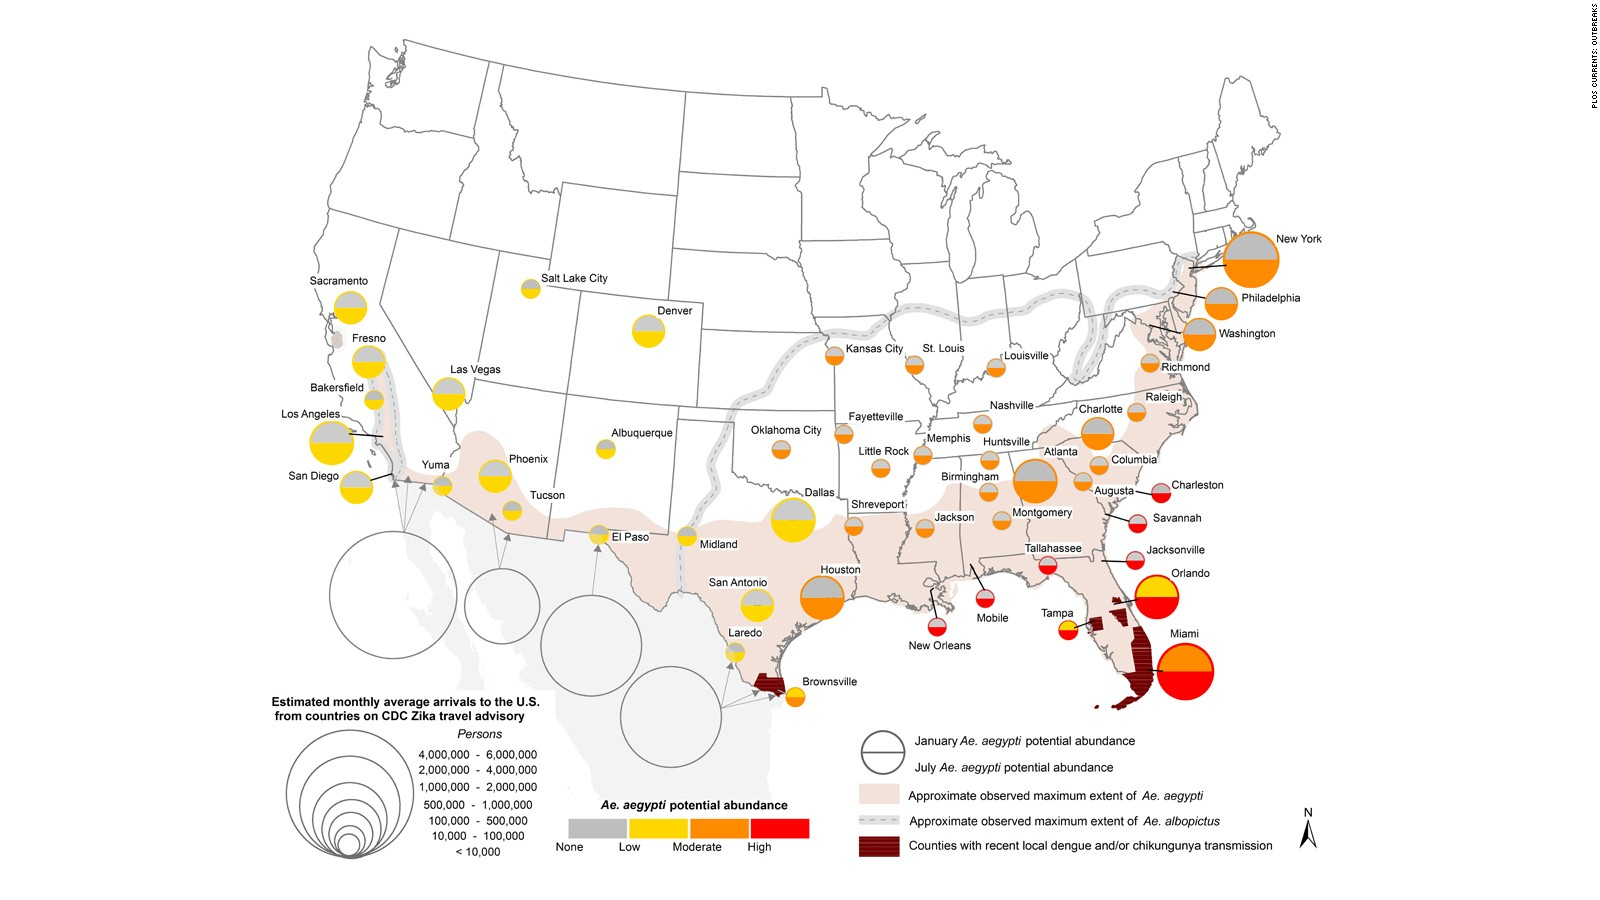 Maps Of The United States Showing The Concentration Of Reported Lyme